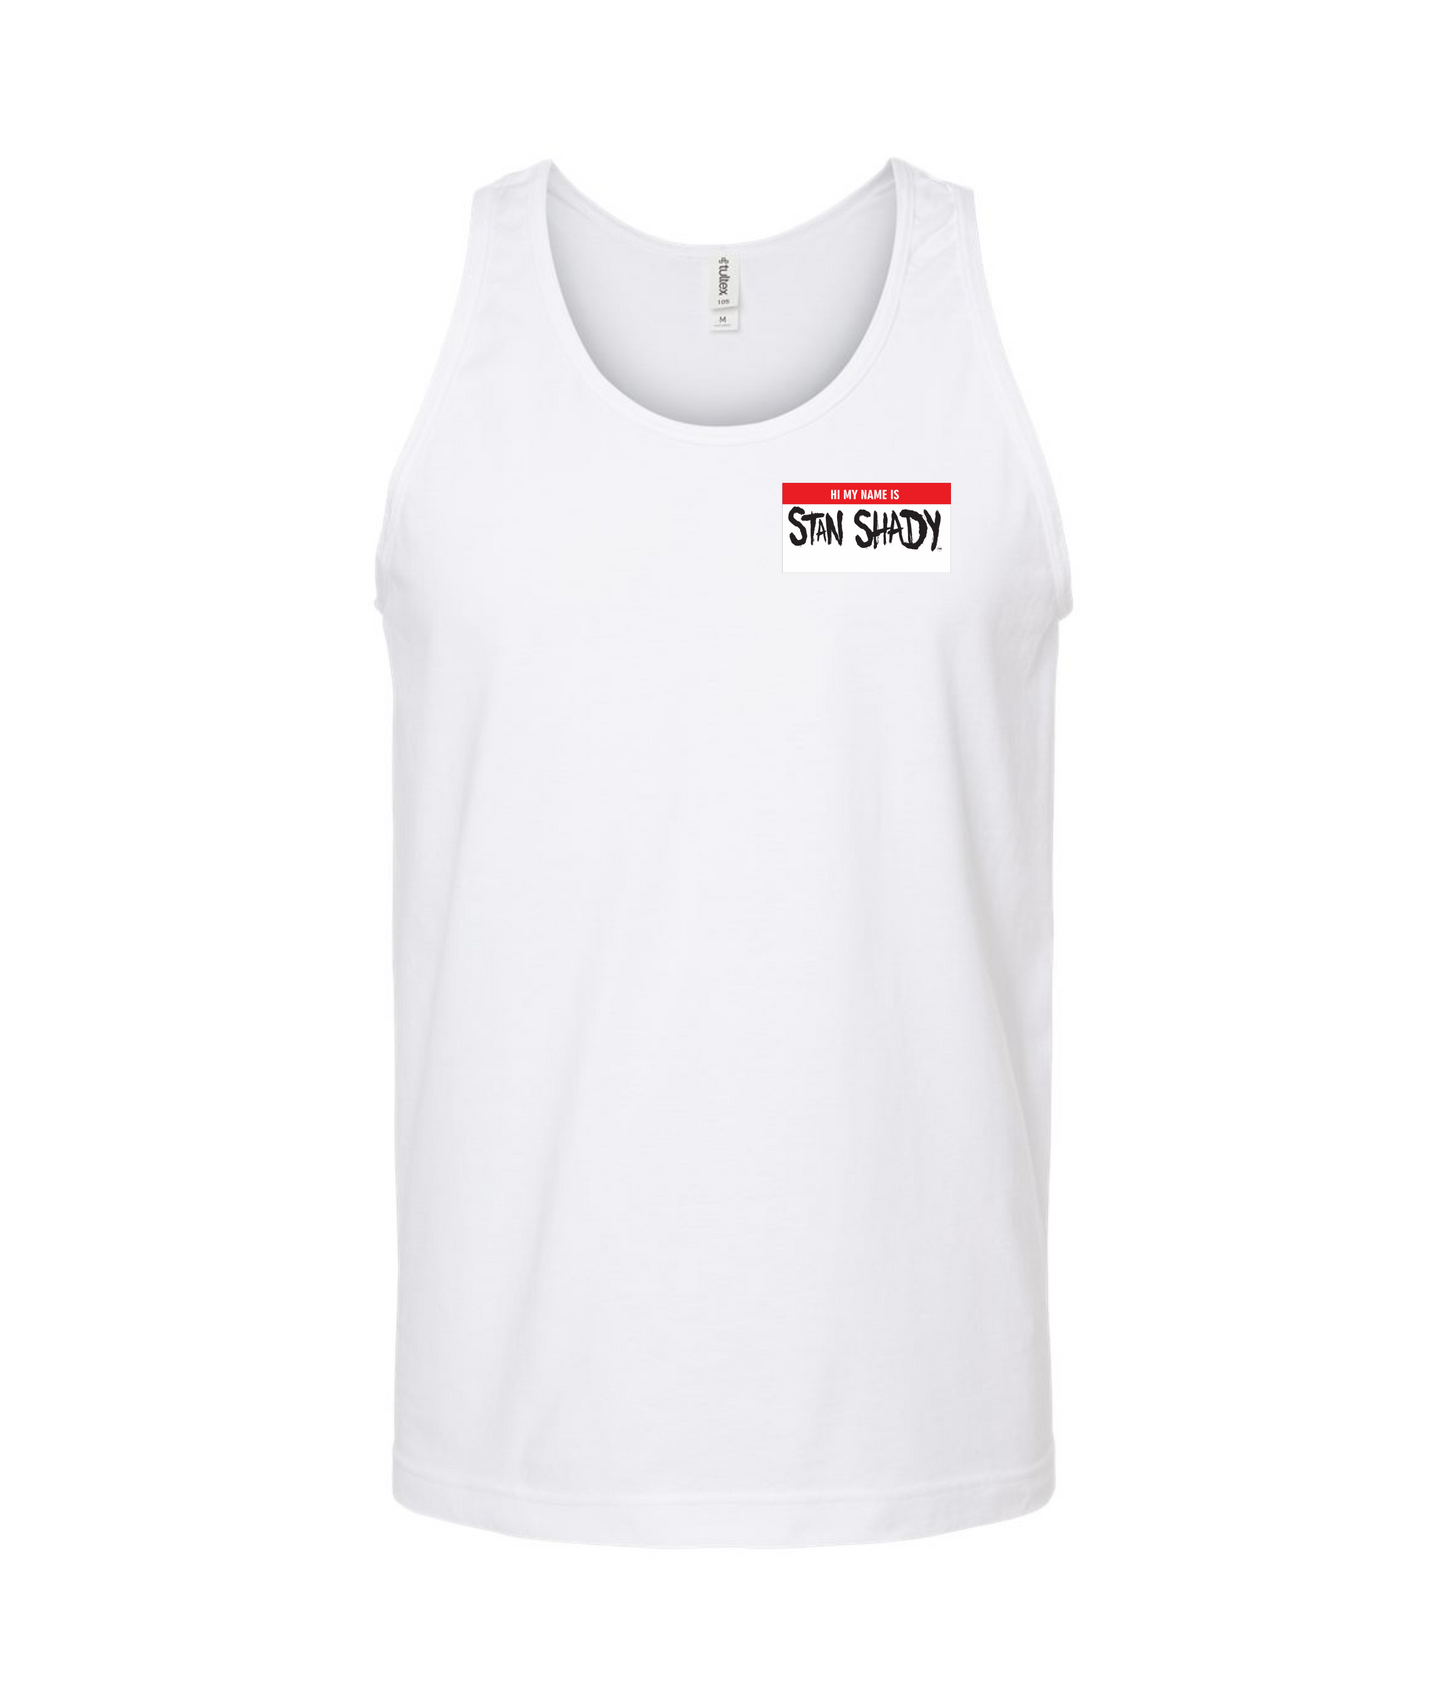 Stan Shady - Hi My Name Is (1 Sided) - White Tank Top